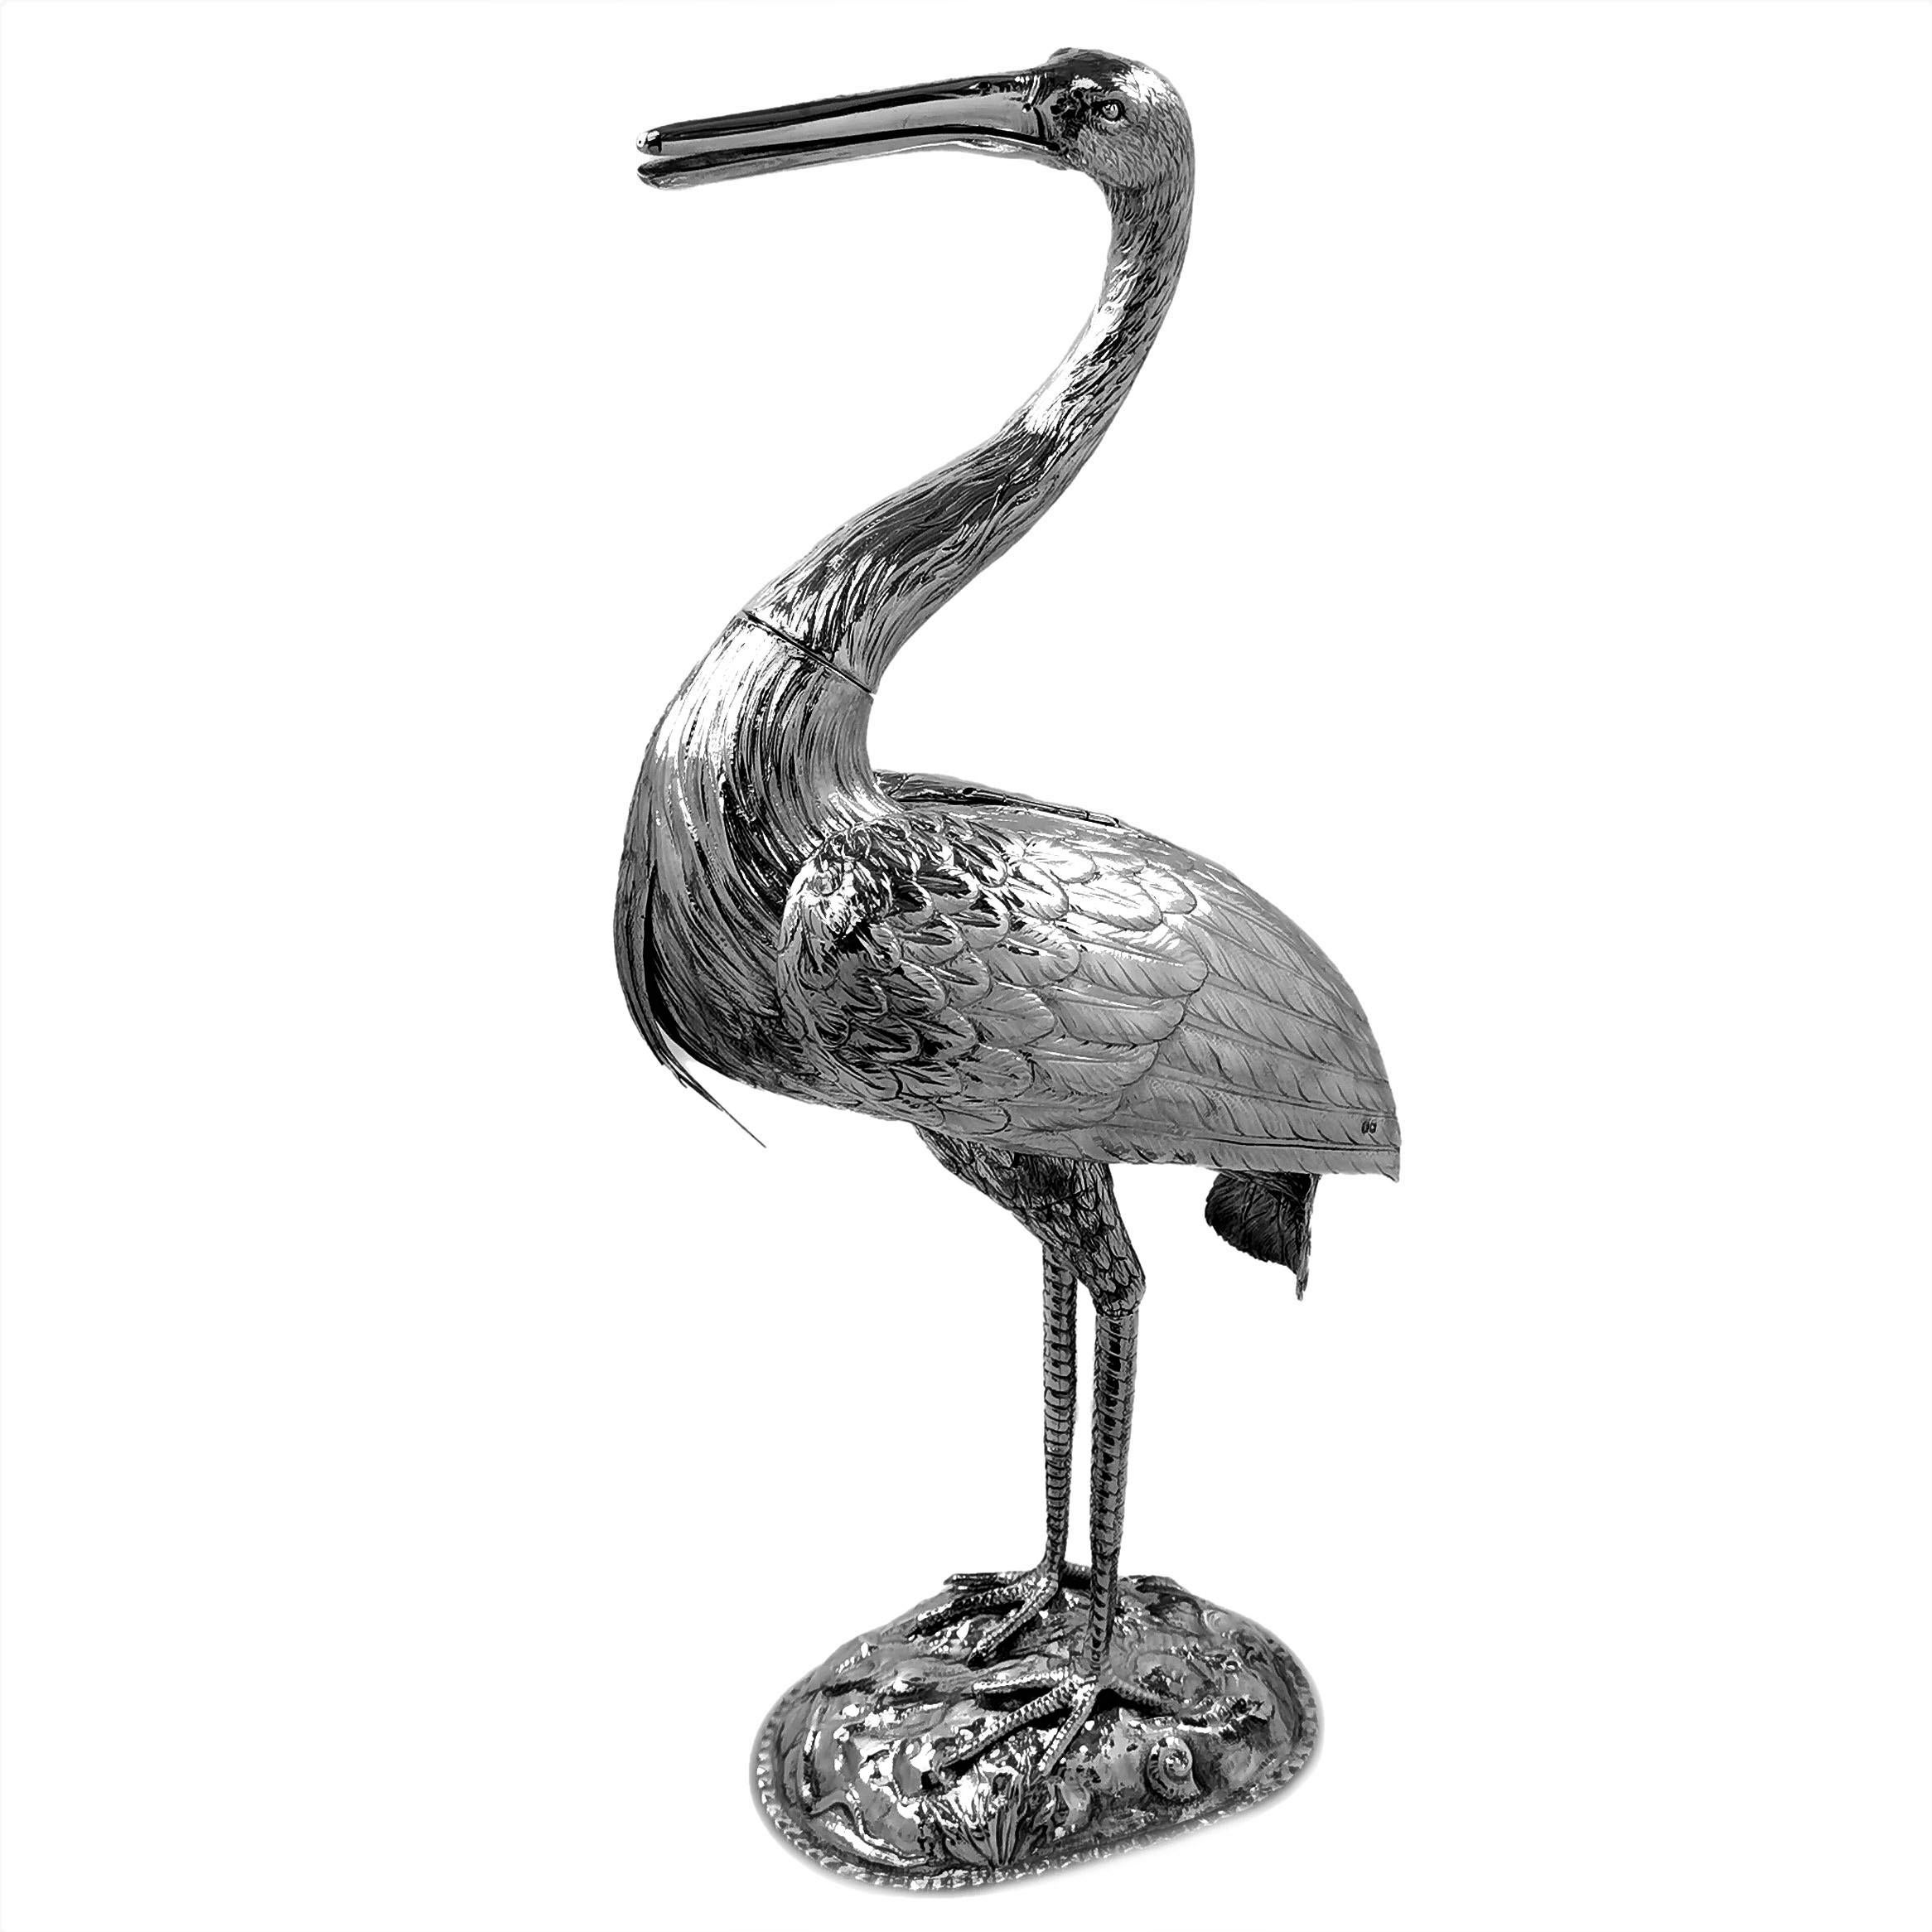 A large, magnificent Victorian era solid Silver model of a Crane / Heron. This tall figure of a Bird stands on a square base embellished with snakes and shells. The Crane / Heron is created with a lovely attention to detail and is a statement piece.